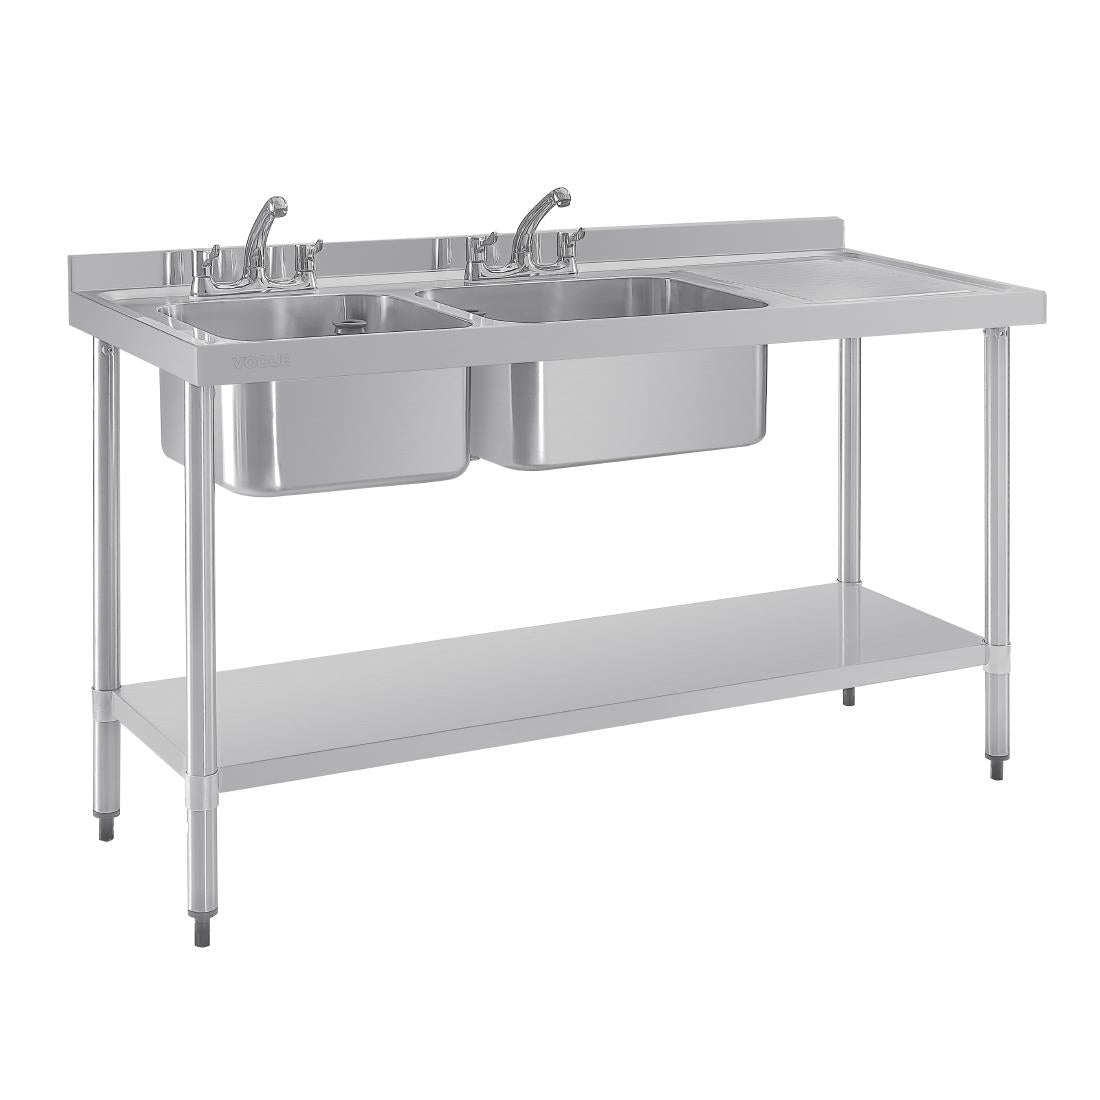 DY824 Vogue Double Sink Right Hand Drainer 1500mm